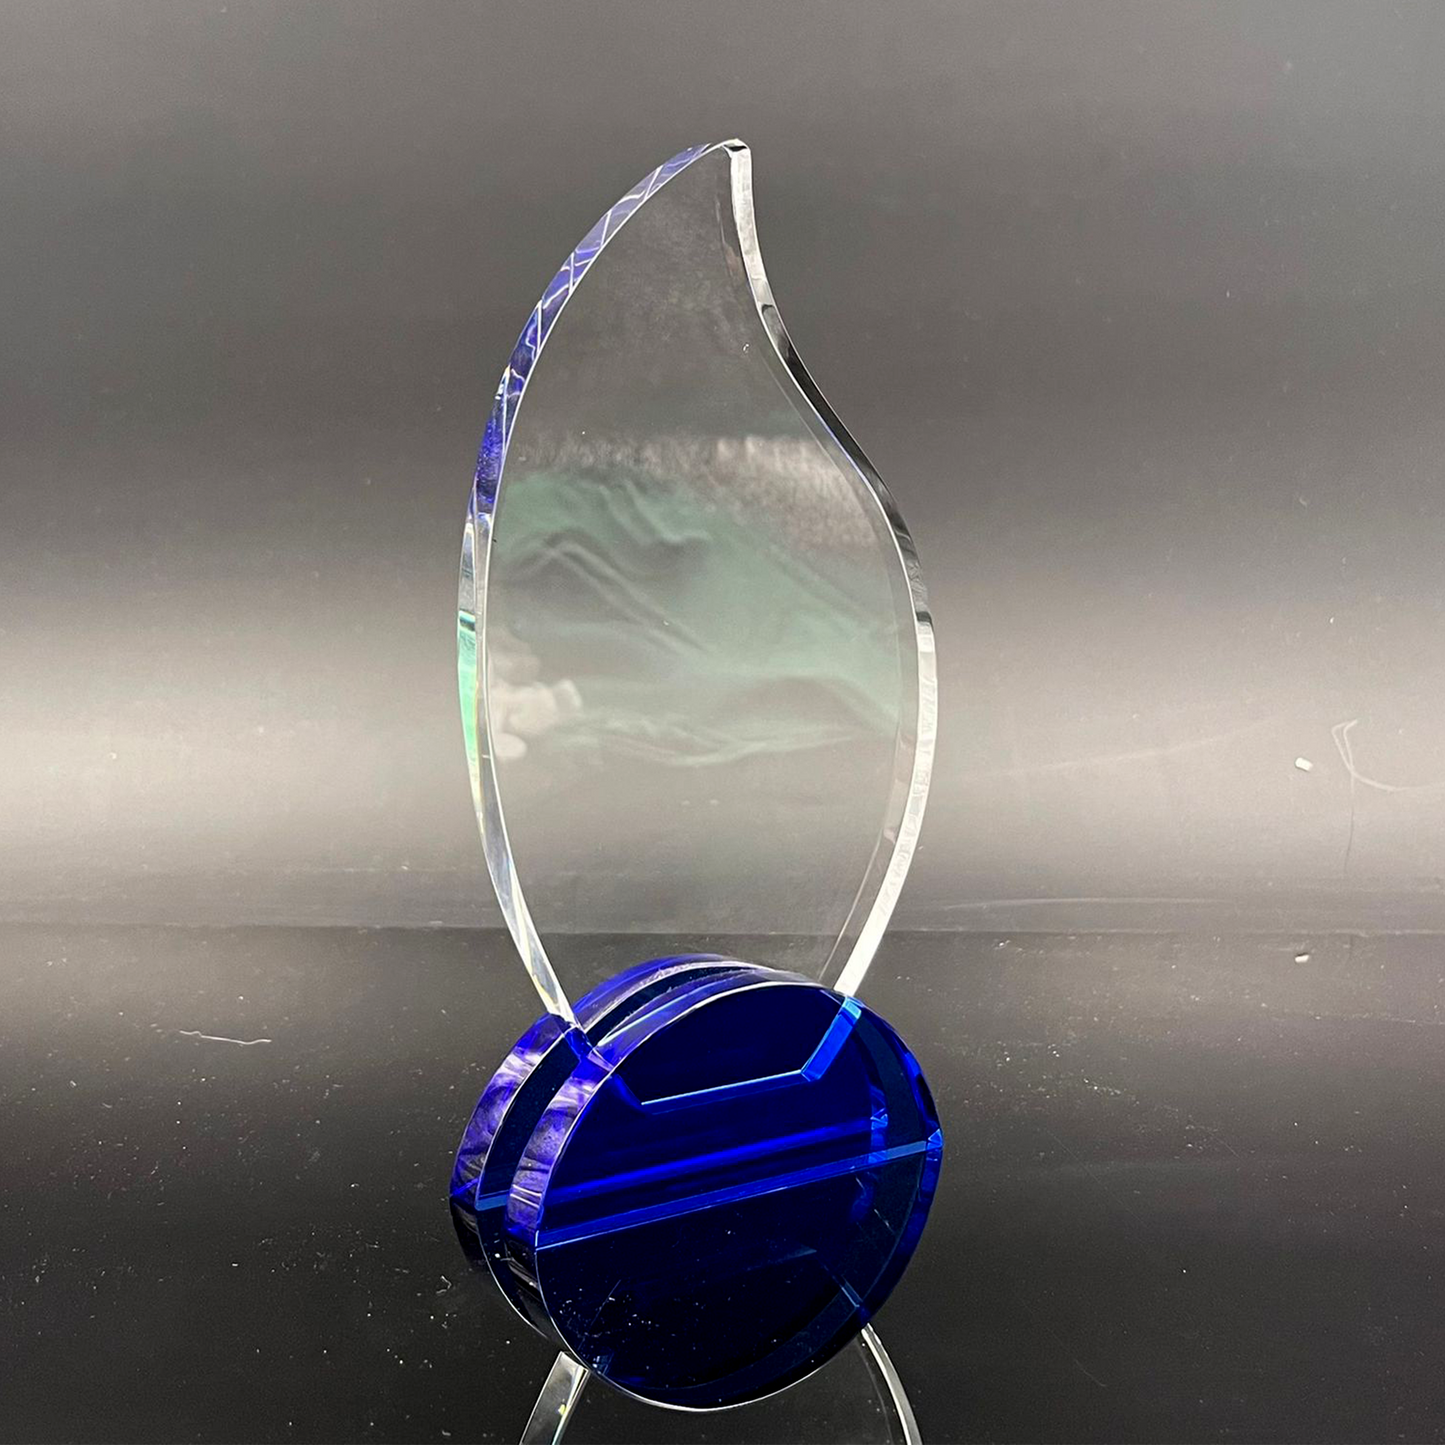 Solar Flame Trophy Award with Blue Base